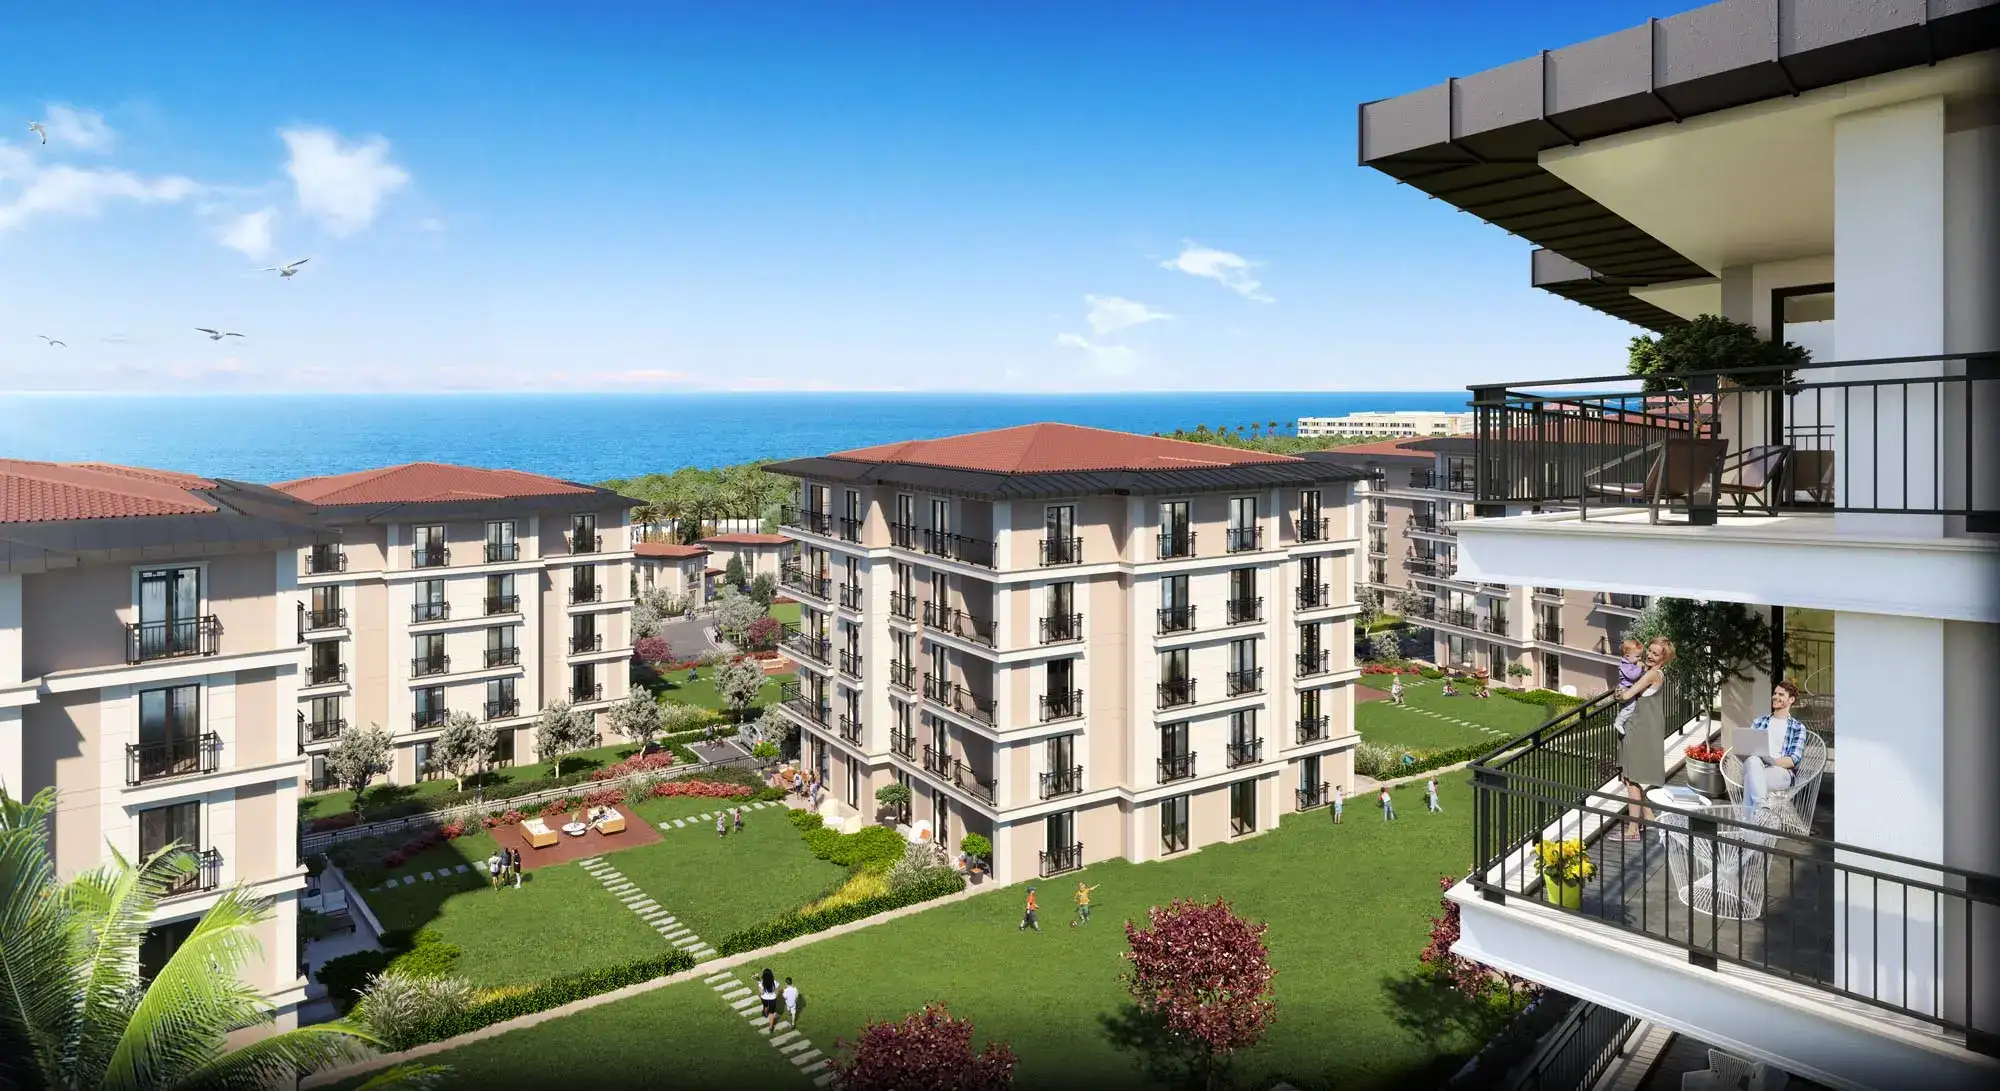 APARTMENTS FOR AALE IN ISTANBUL JUST 100M AWAY FROM THE SEA